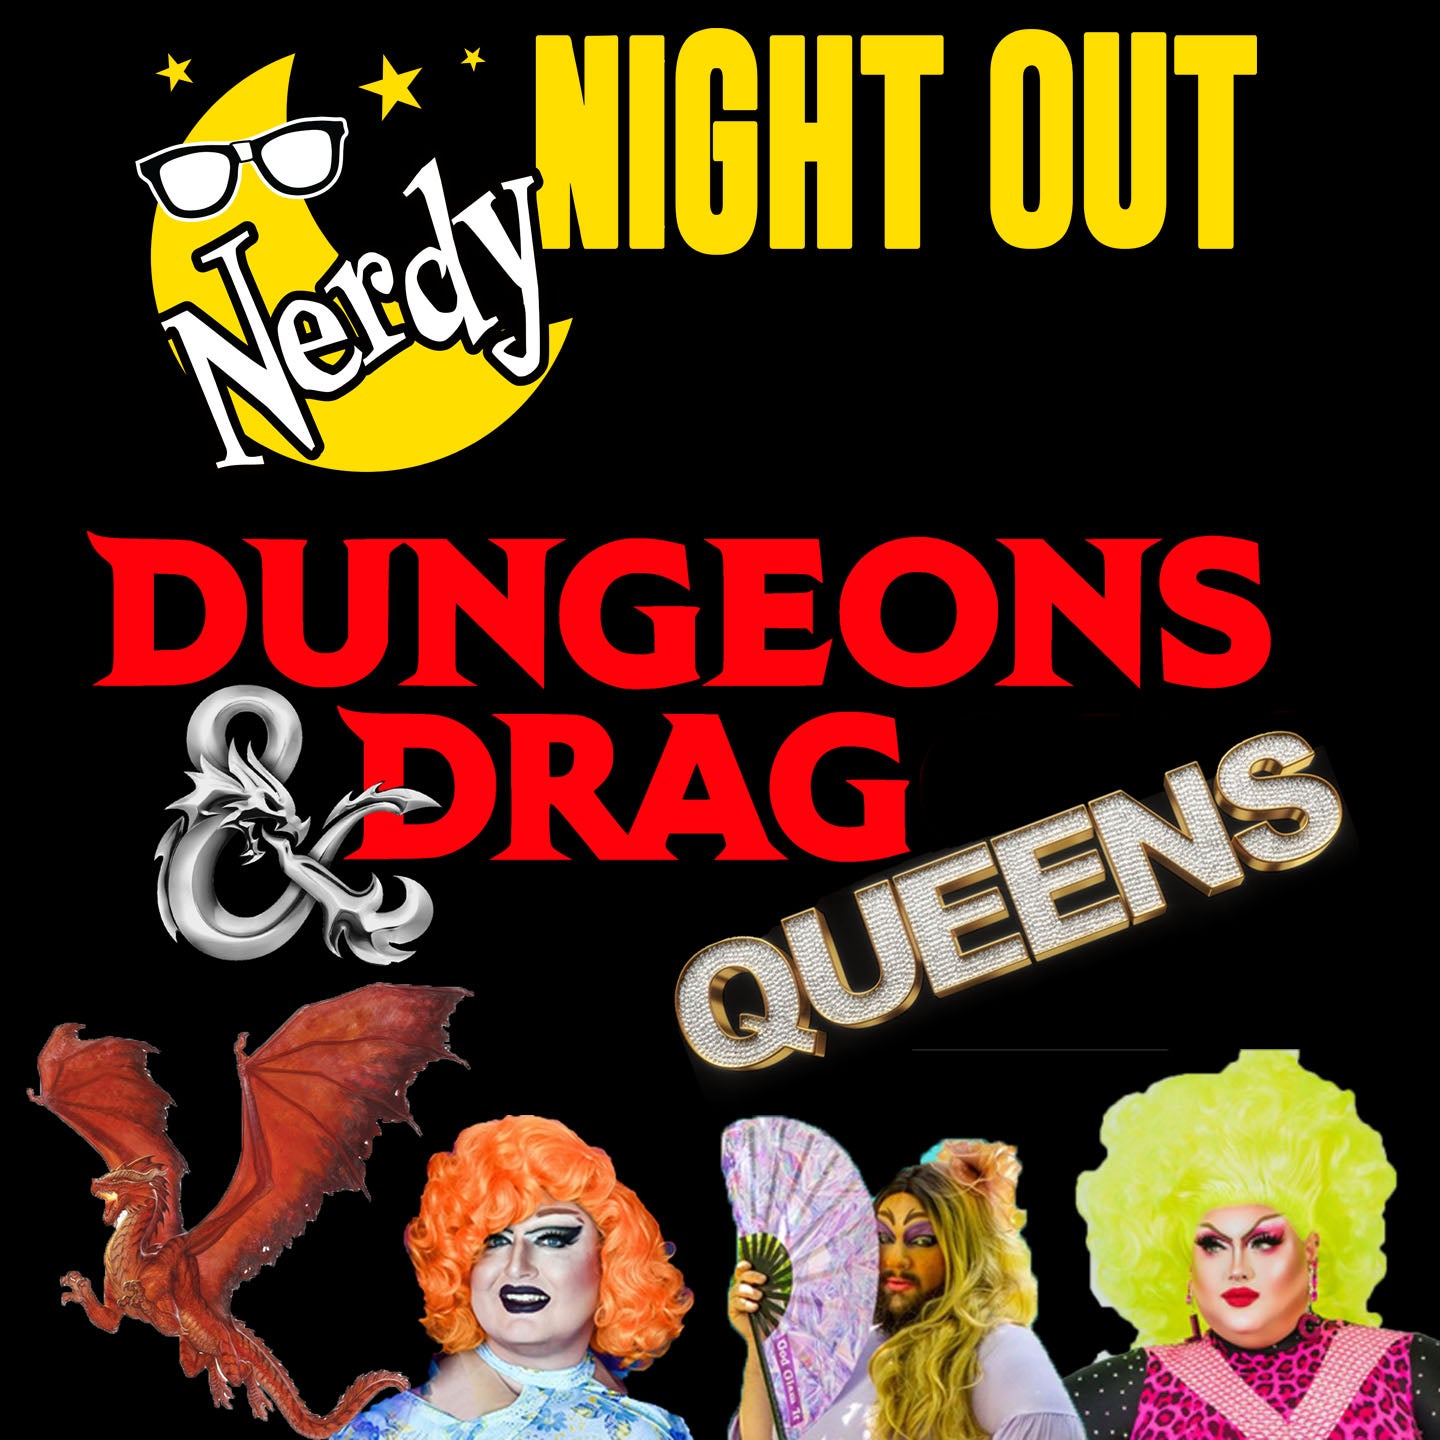 Nerdy Night Out: Dungeons & Drag Queens